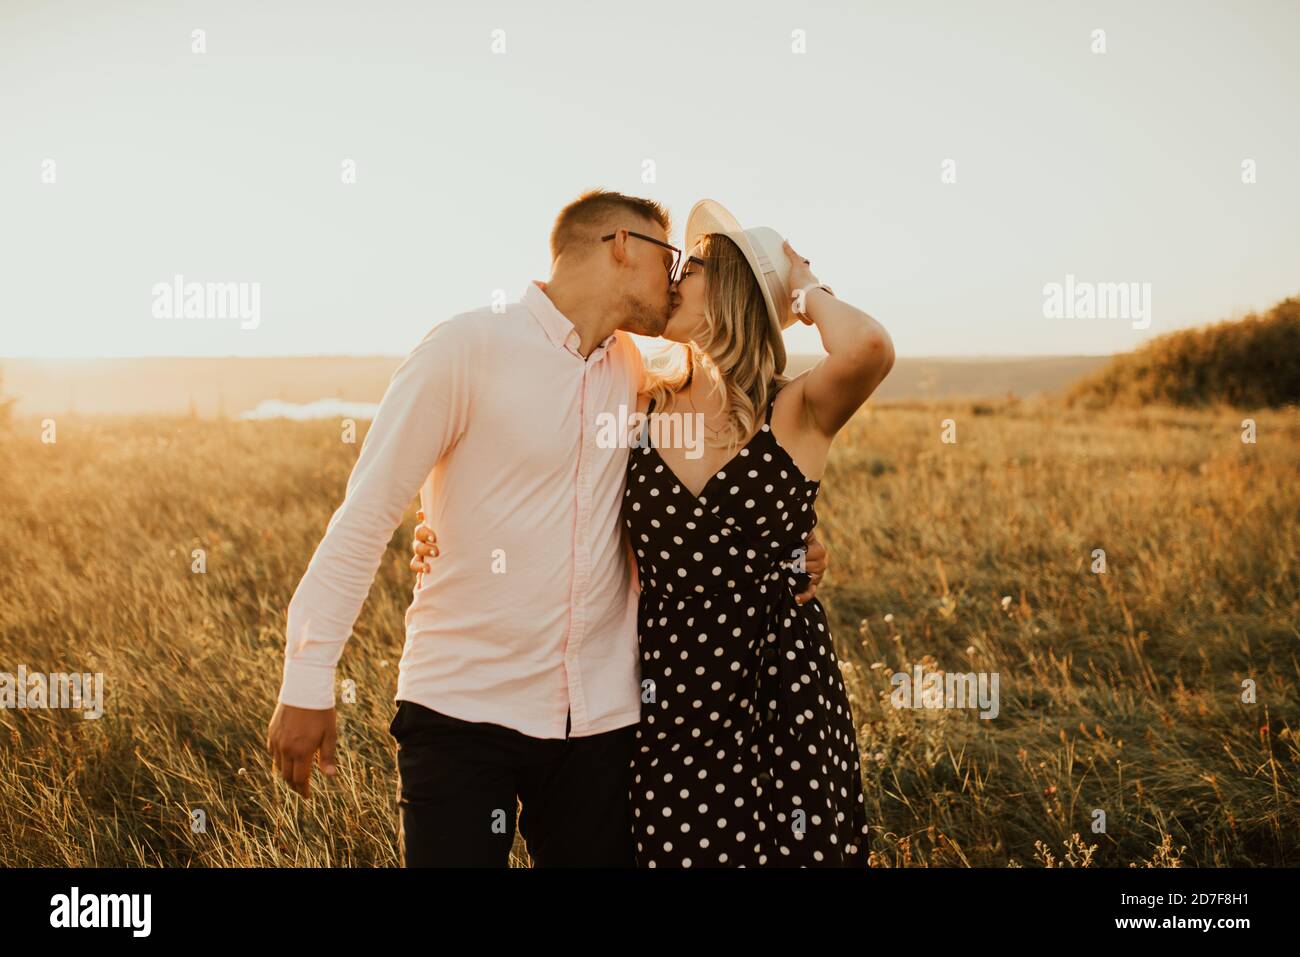 guy with a girl in hat walking in meadow Stock Photo